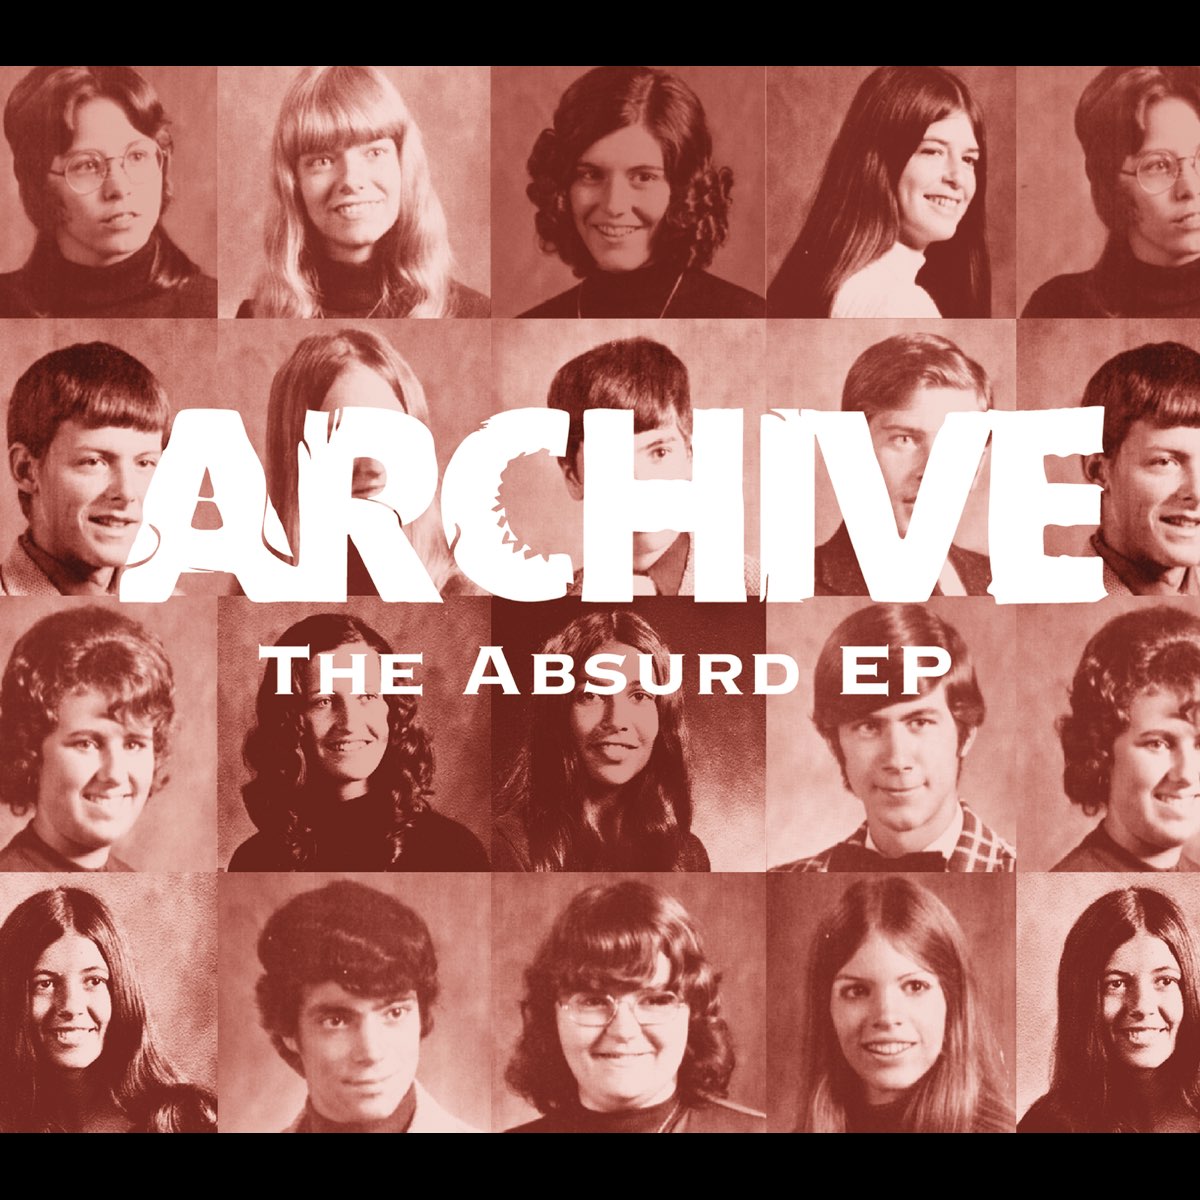 Absurd - EP - Album by Archive - Apple Music